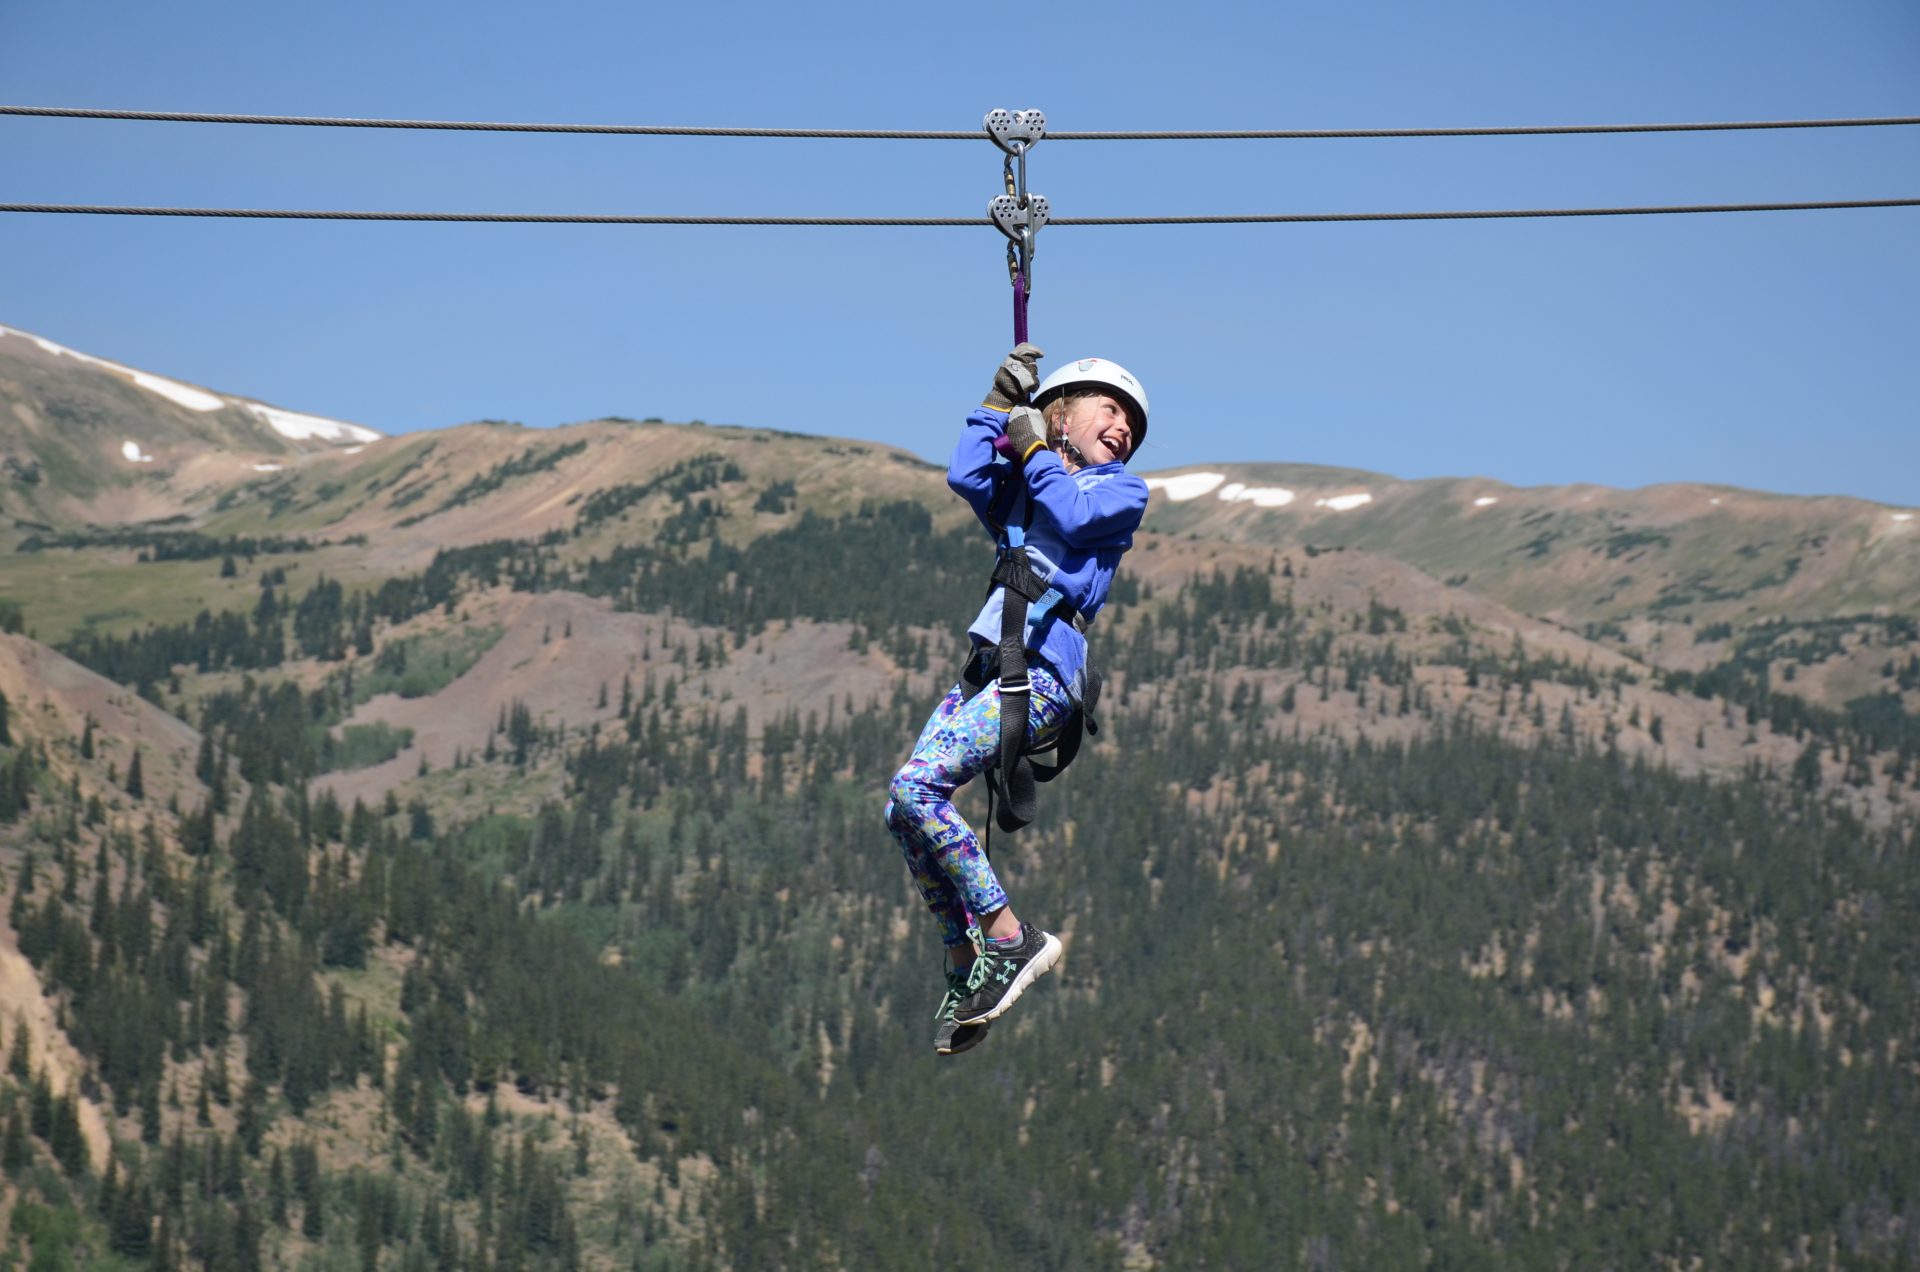 Our zipline company leaves nothing to chance, from safety to creating an unforgettable experience